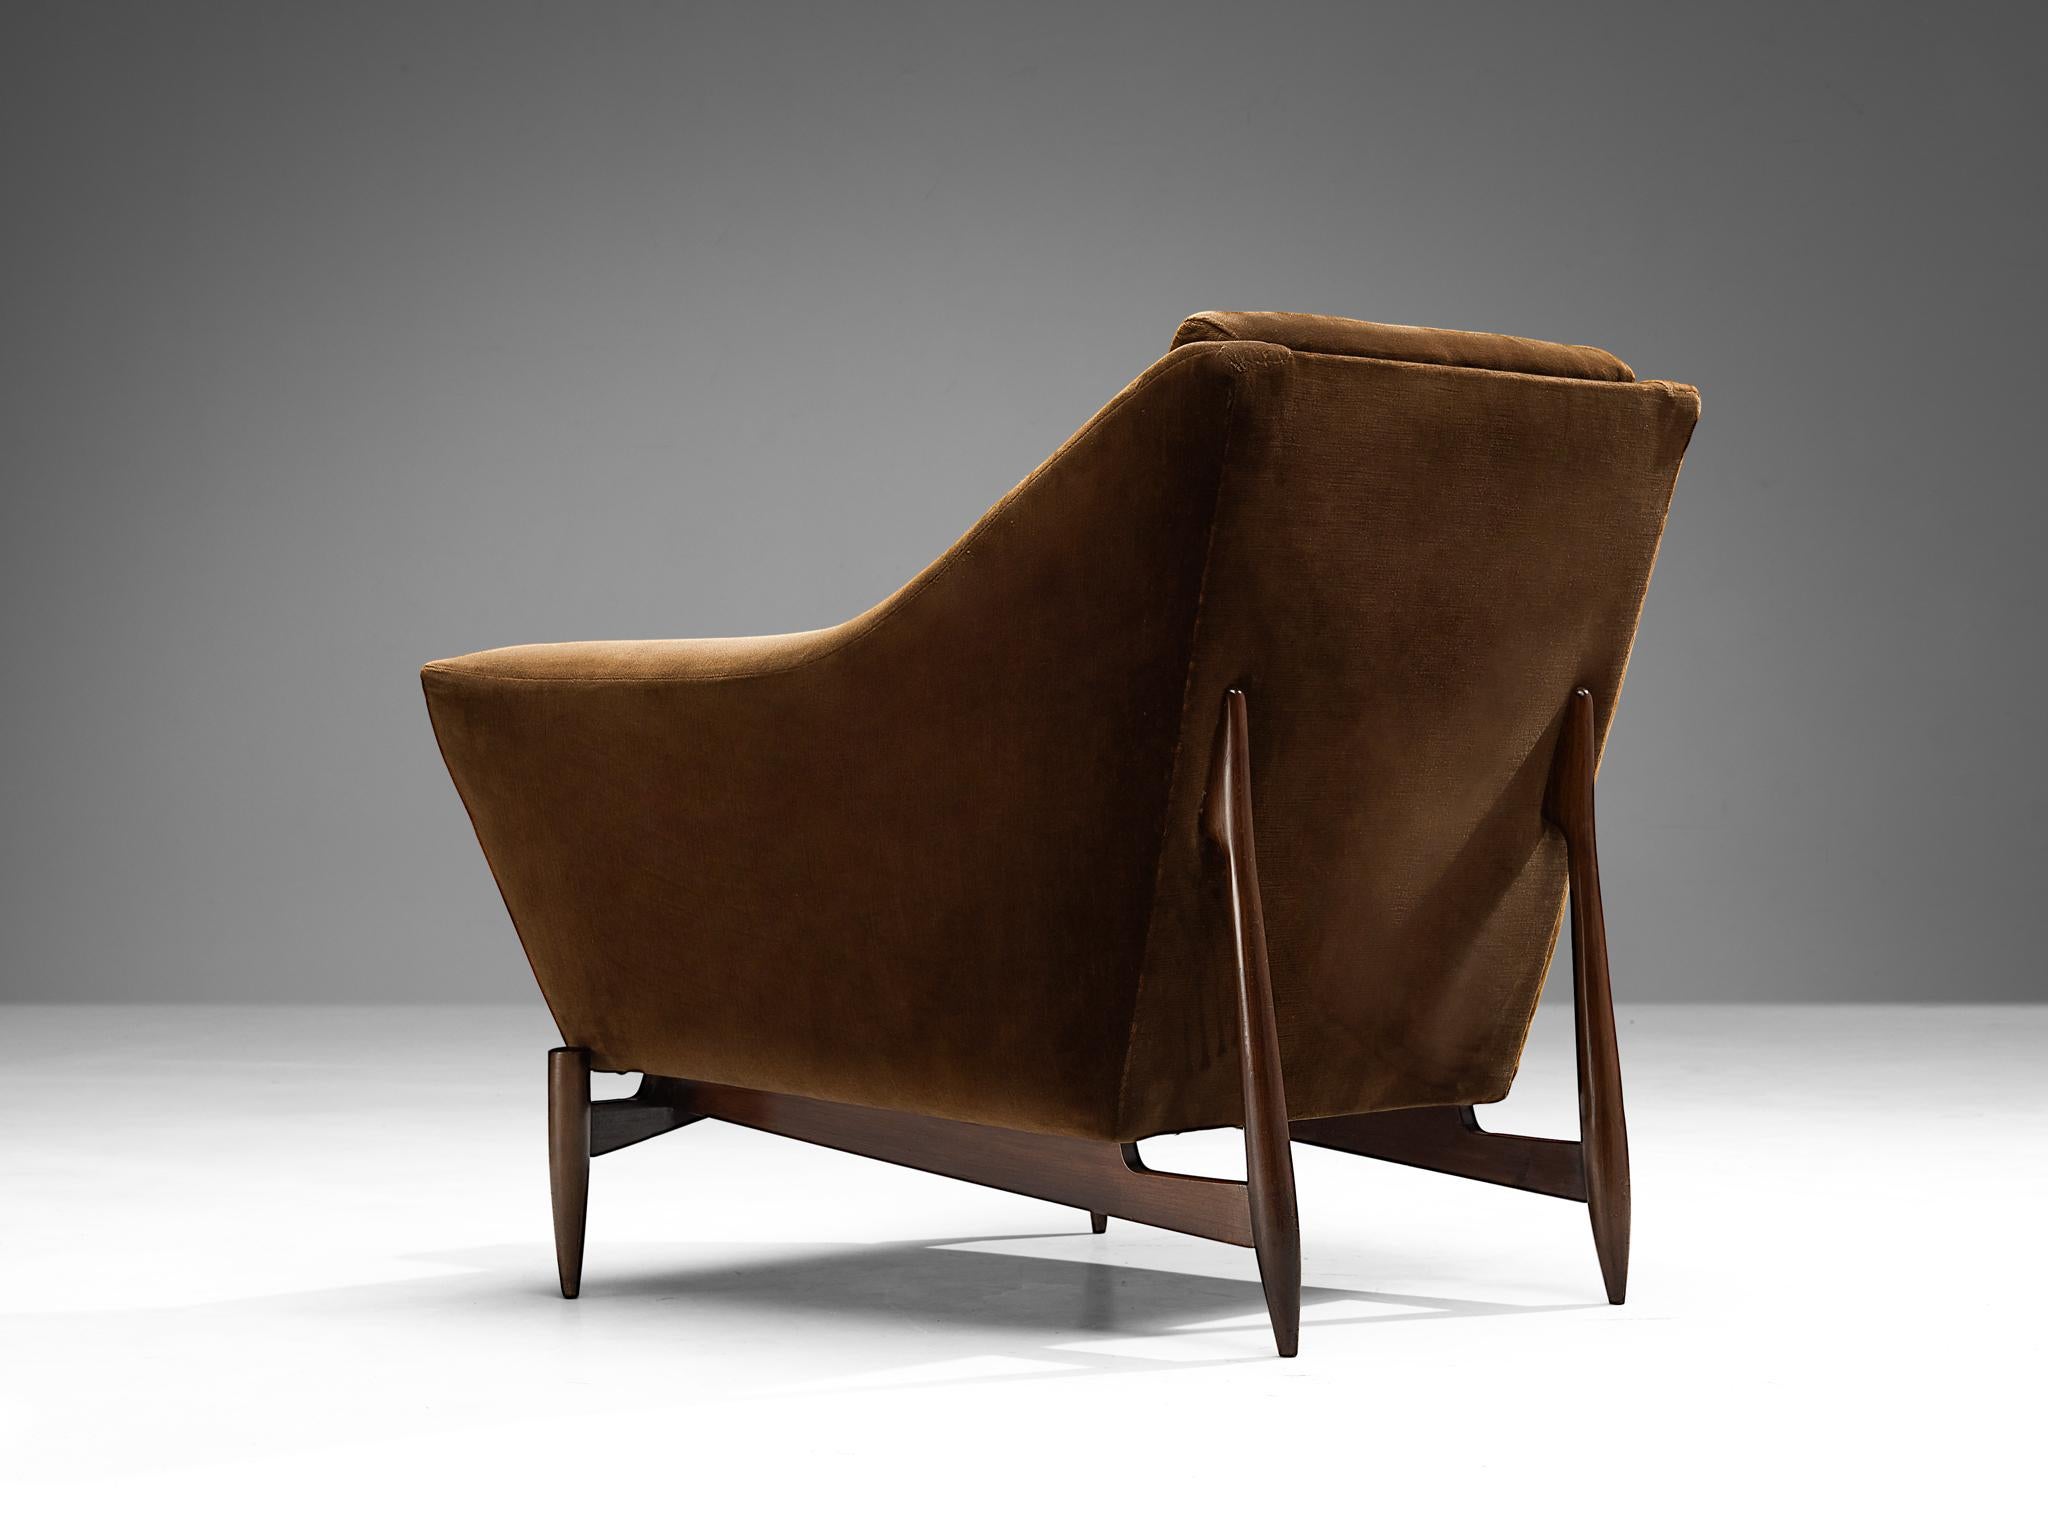 Mid-20th Century Italian Pair of Lounge Chairs with Exposed Wooden Frame in Brown Velvet